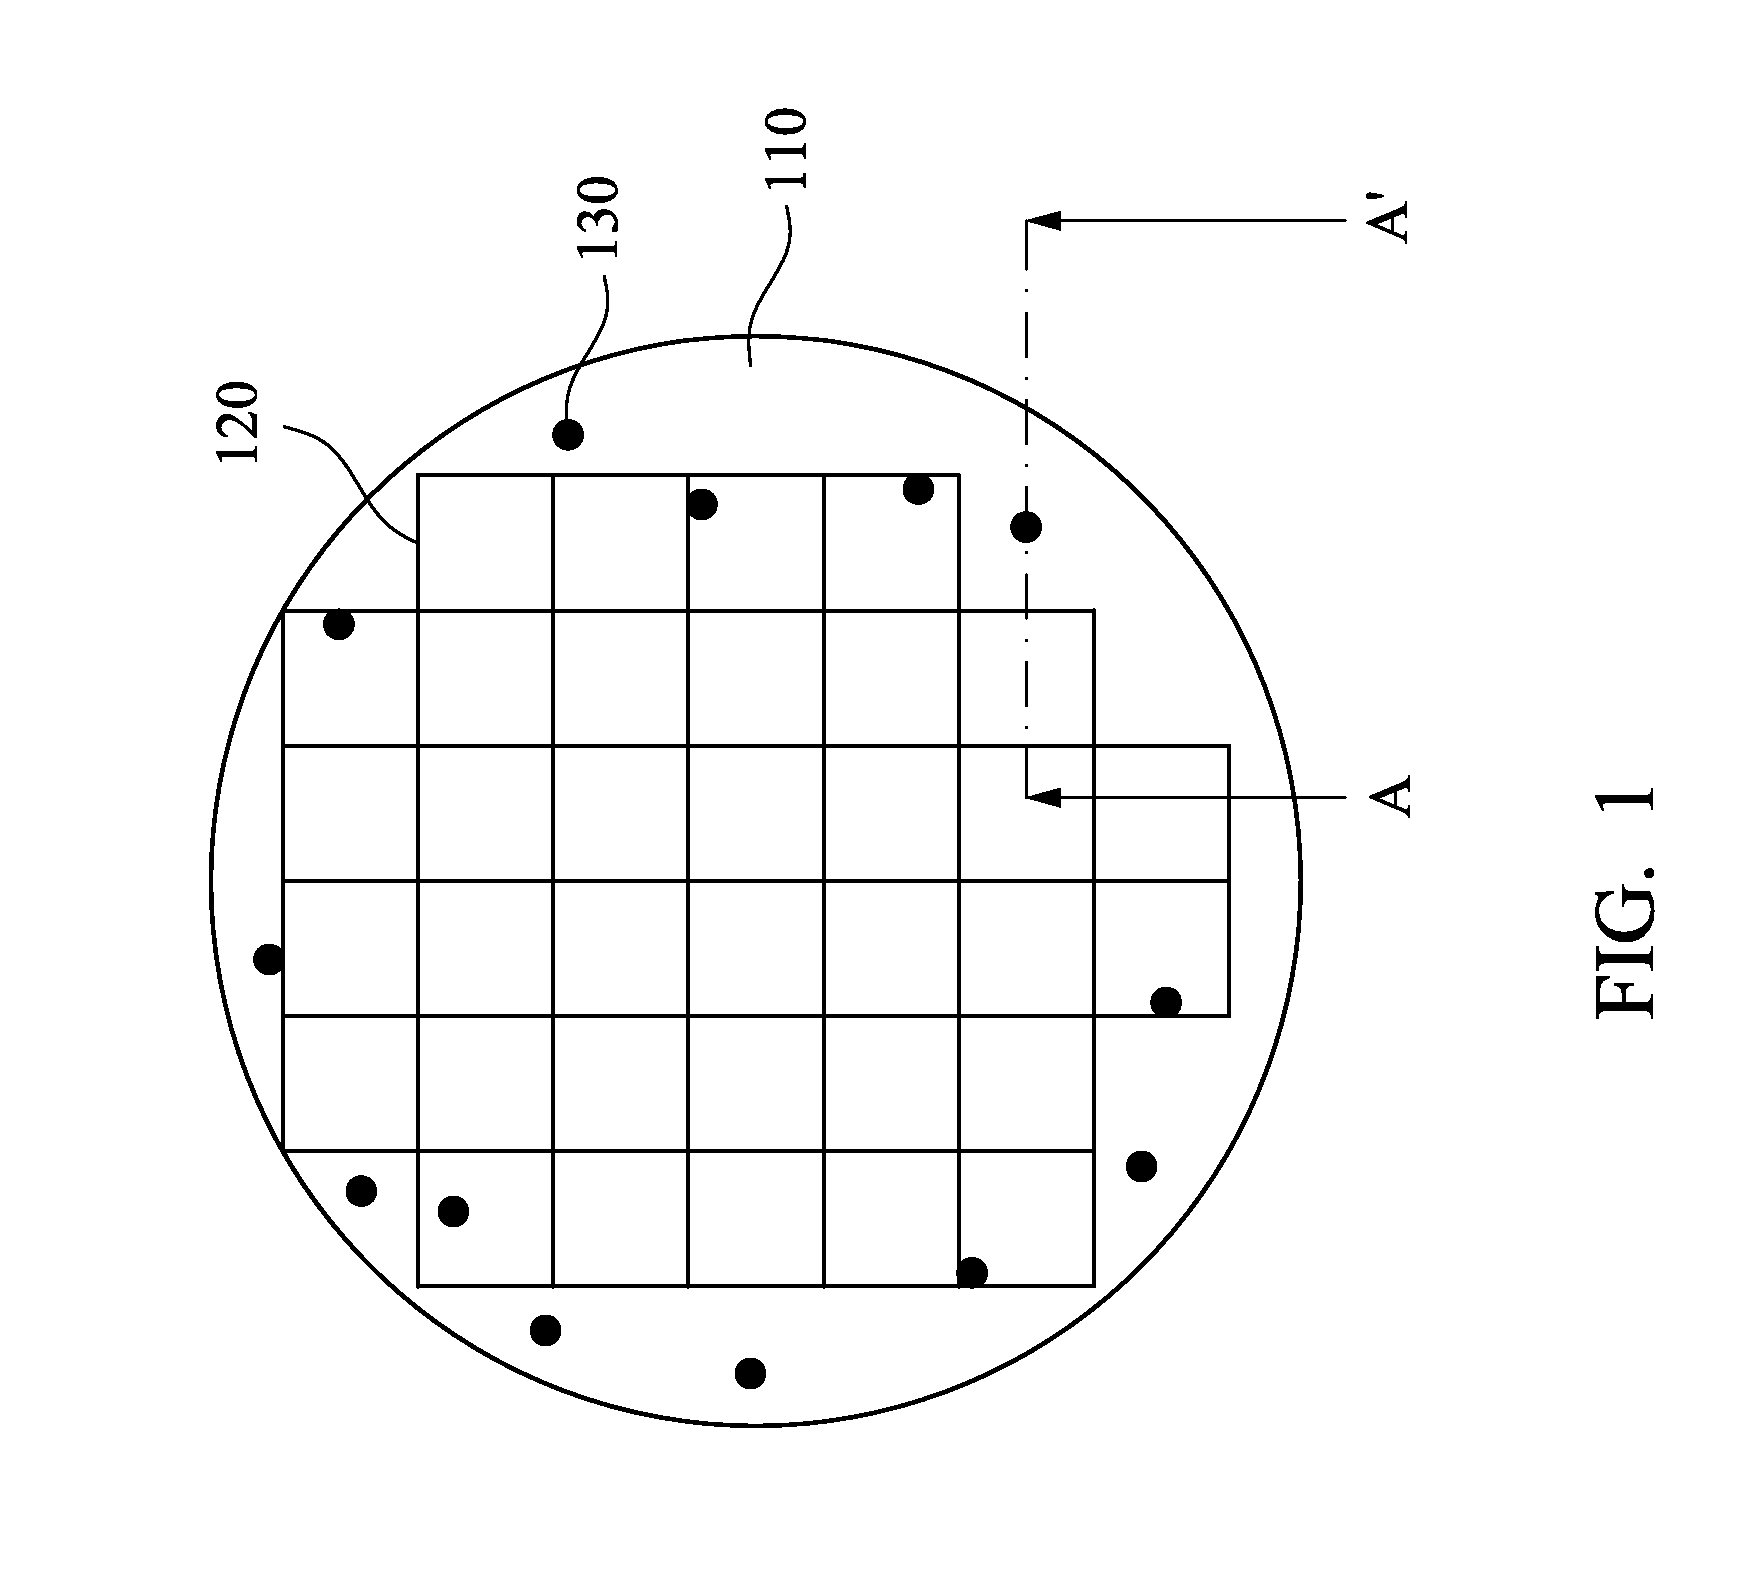 Wafer treatment solution for edge-bead removal, edge film hump reduction and resist surface smooth, its apparatus and edge-bead removal method by using the same